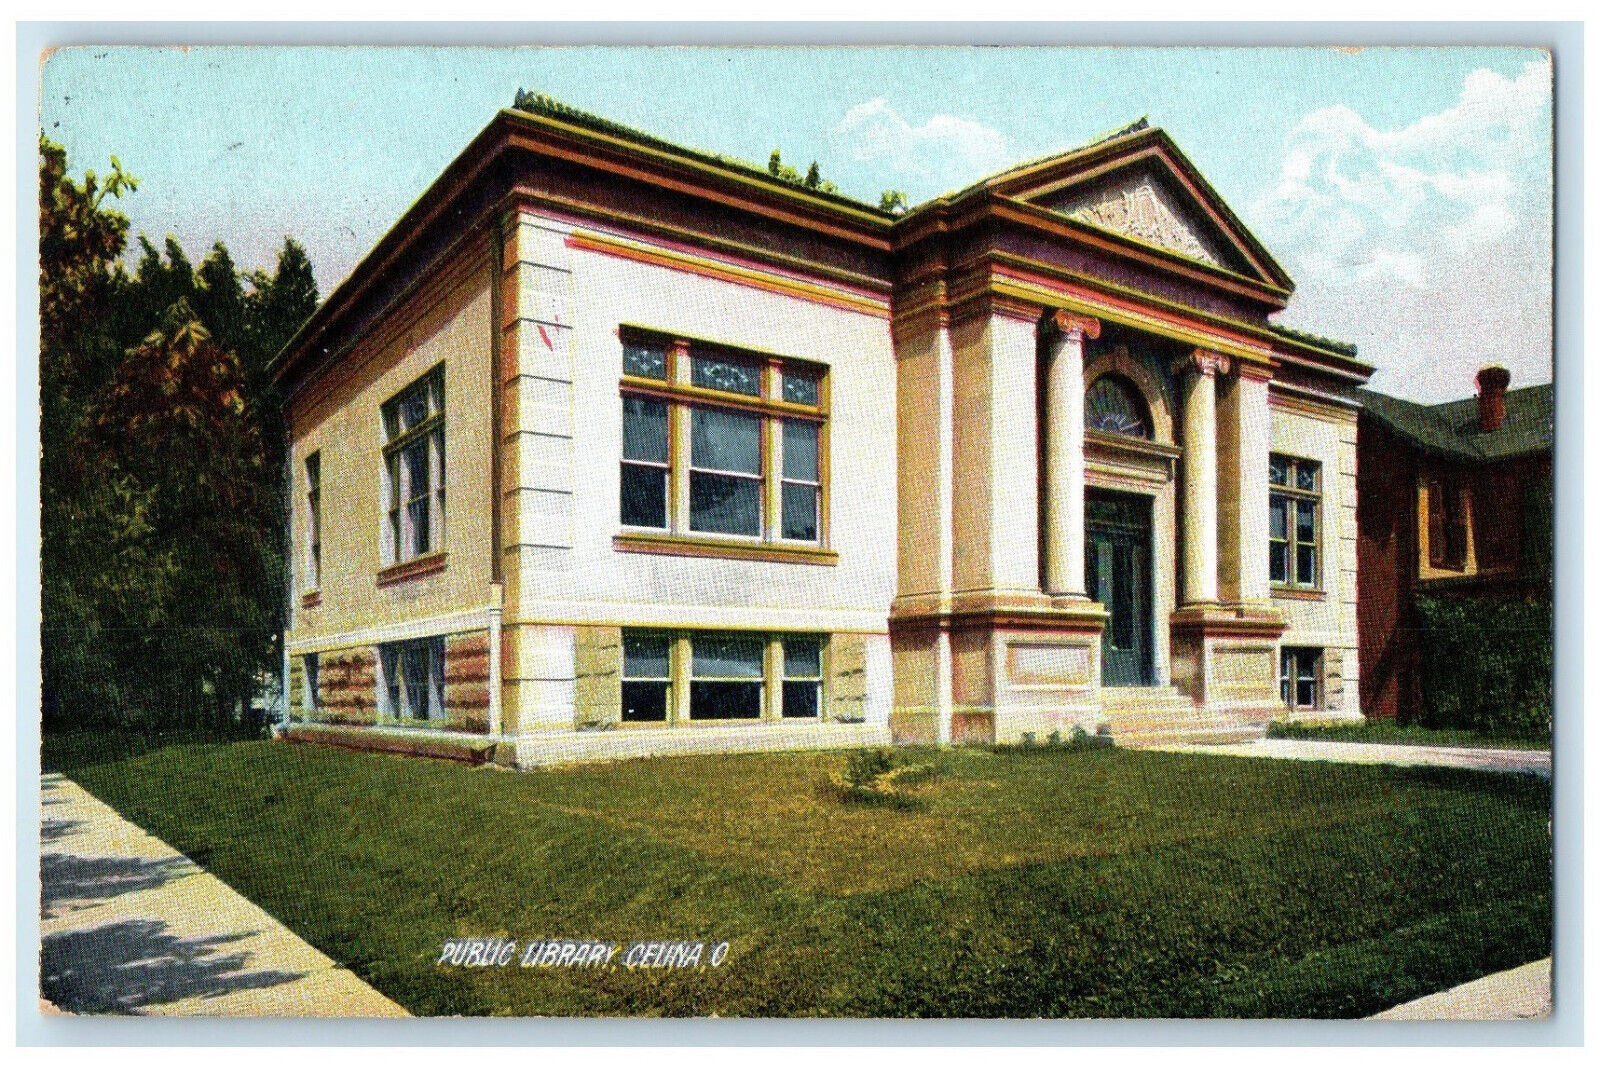 c1950's Entrance to Public Library Celina Ohio OH Vintage Posted Postcard